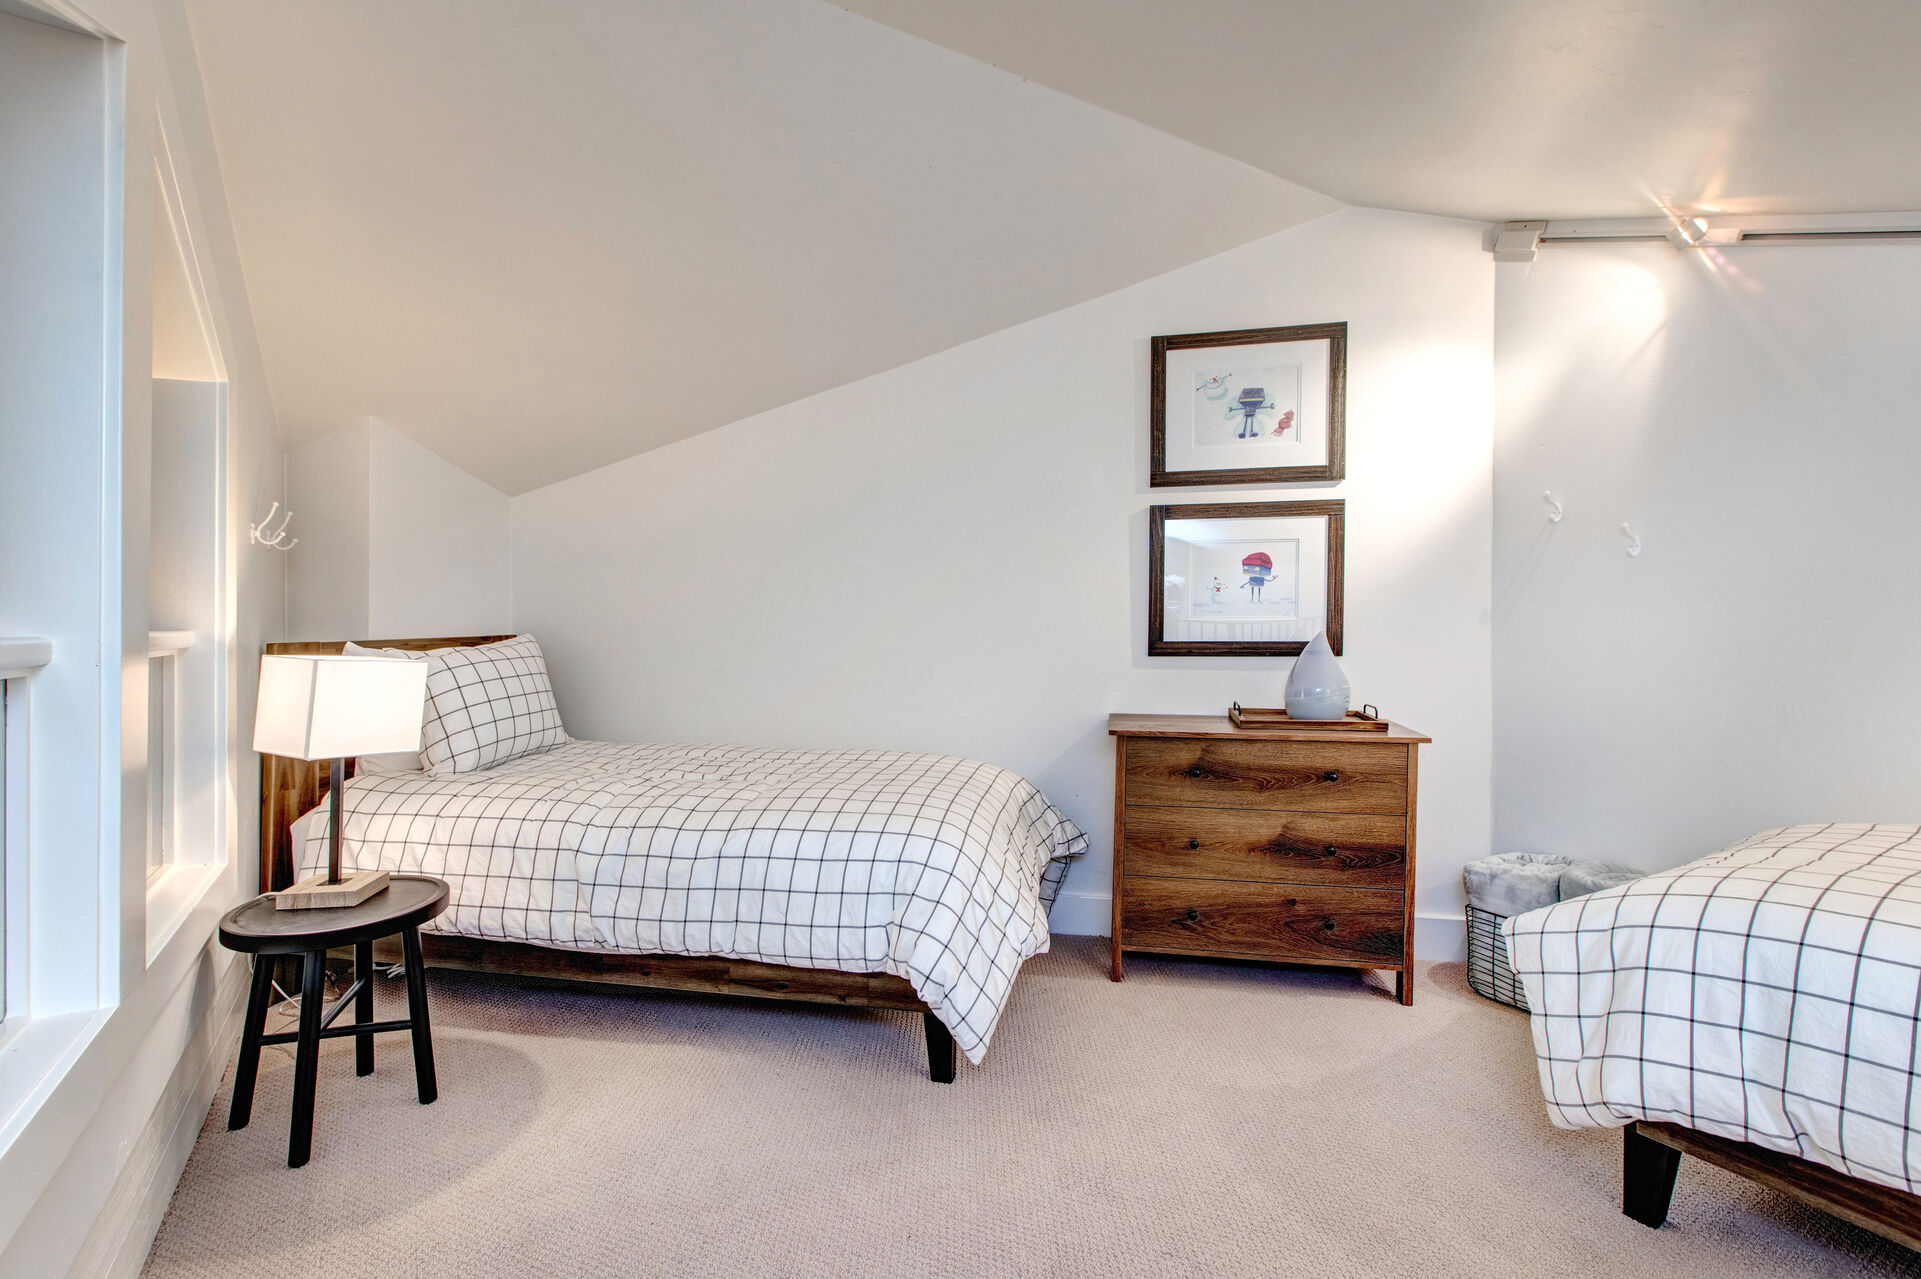 Located at the top of the spiral staircase is the homes' loft with two twin beds